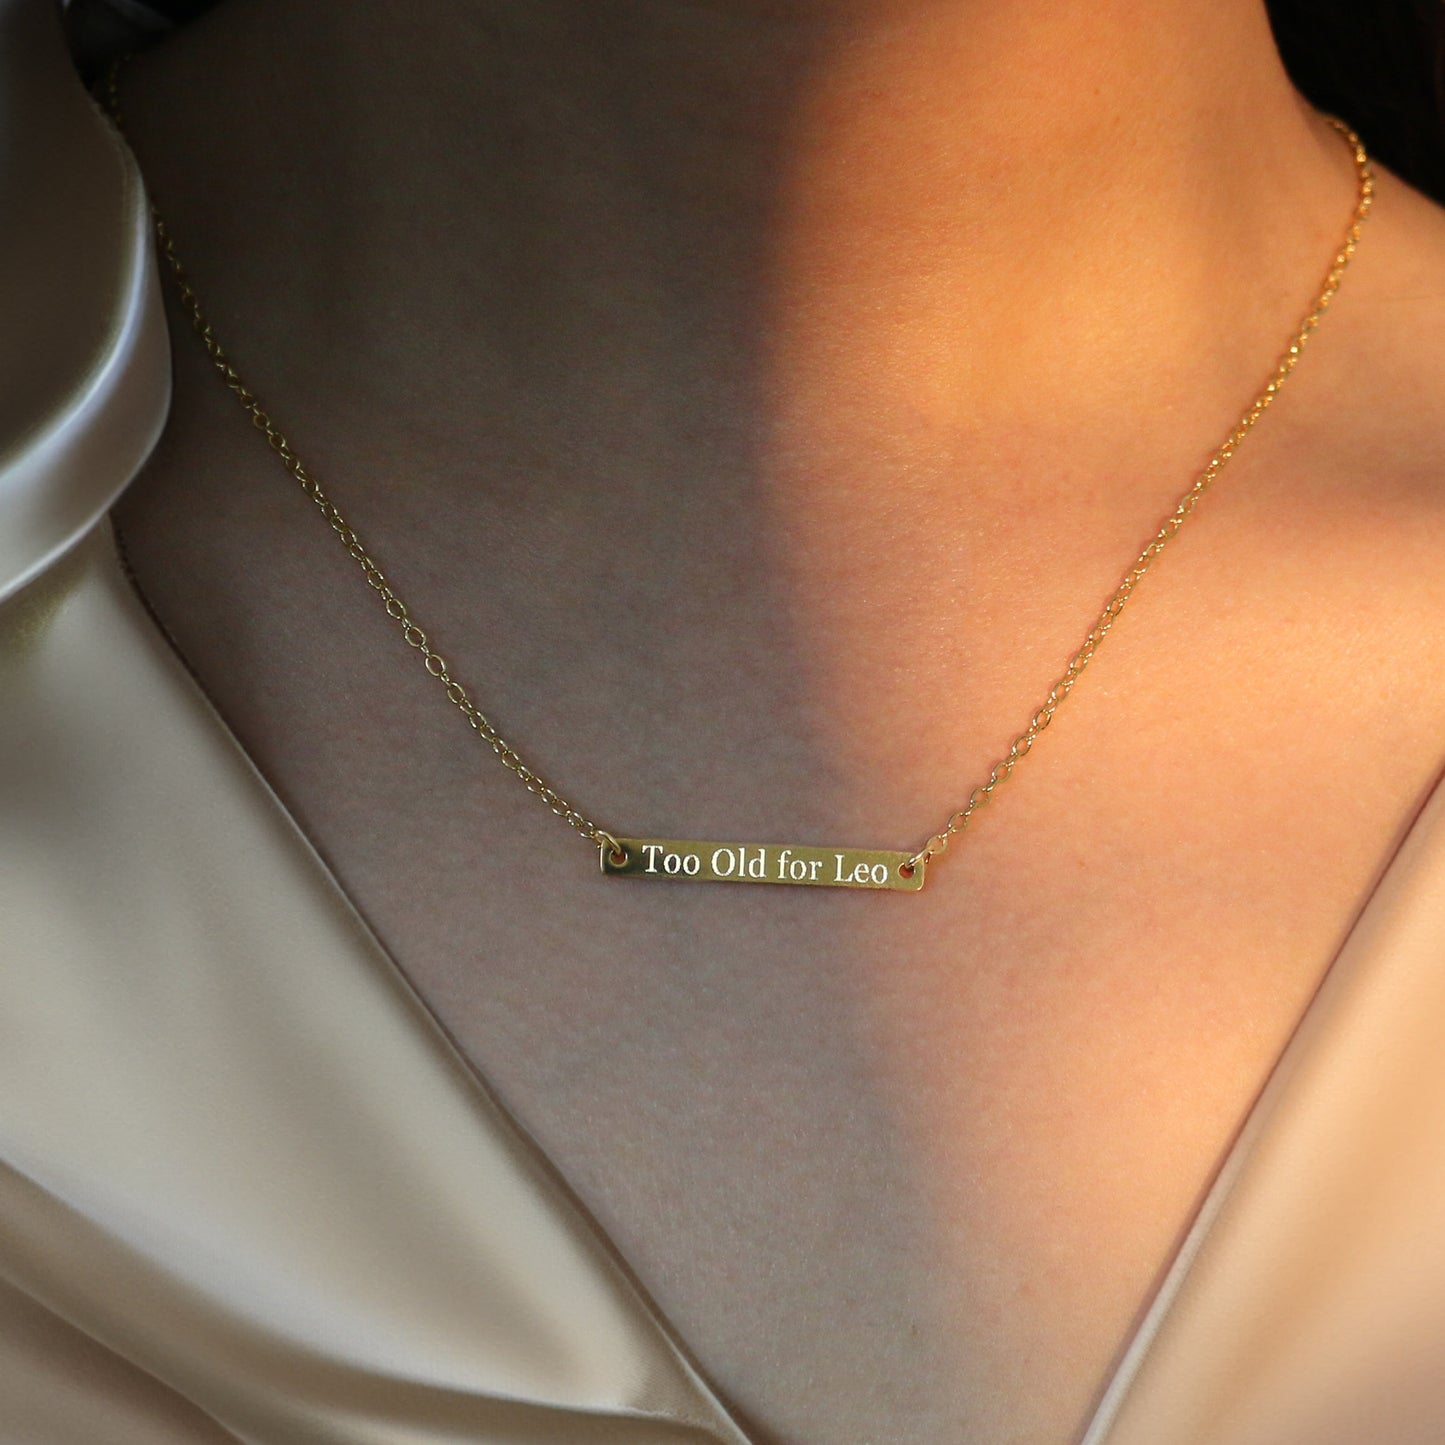 Personalized Name Necklace - Custom Engraved Necklace